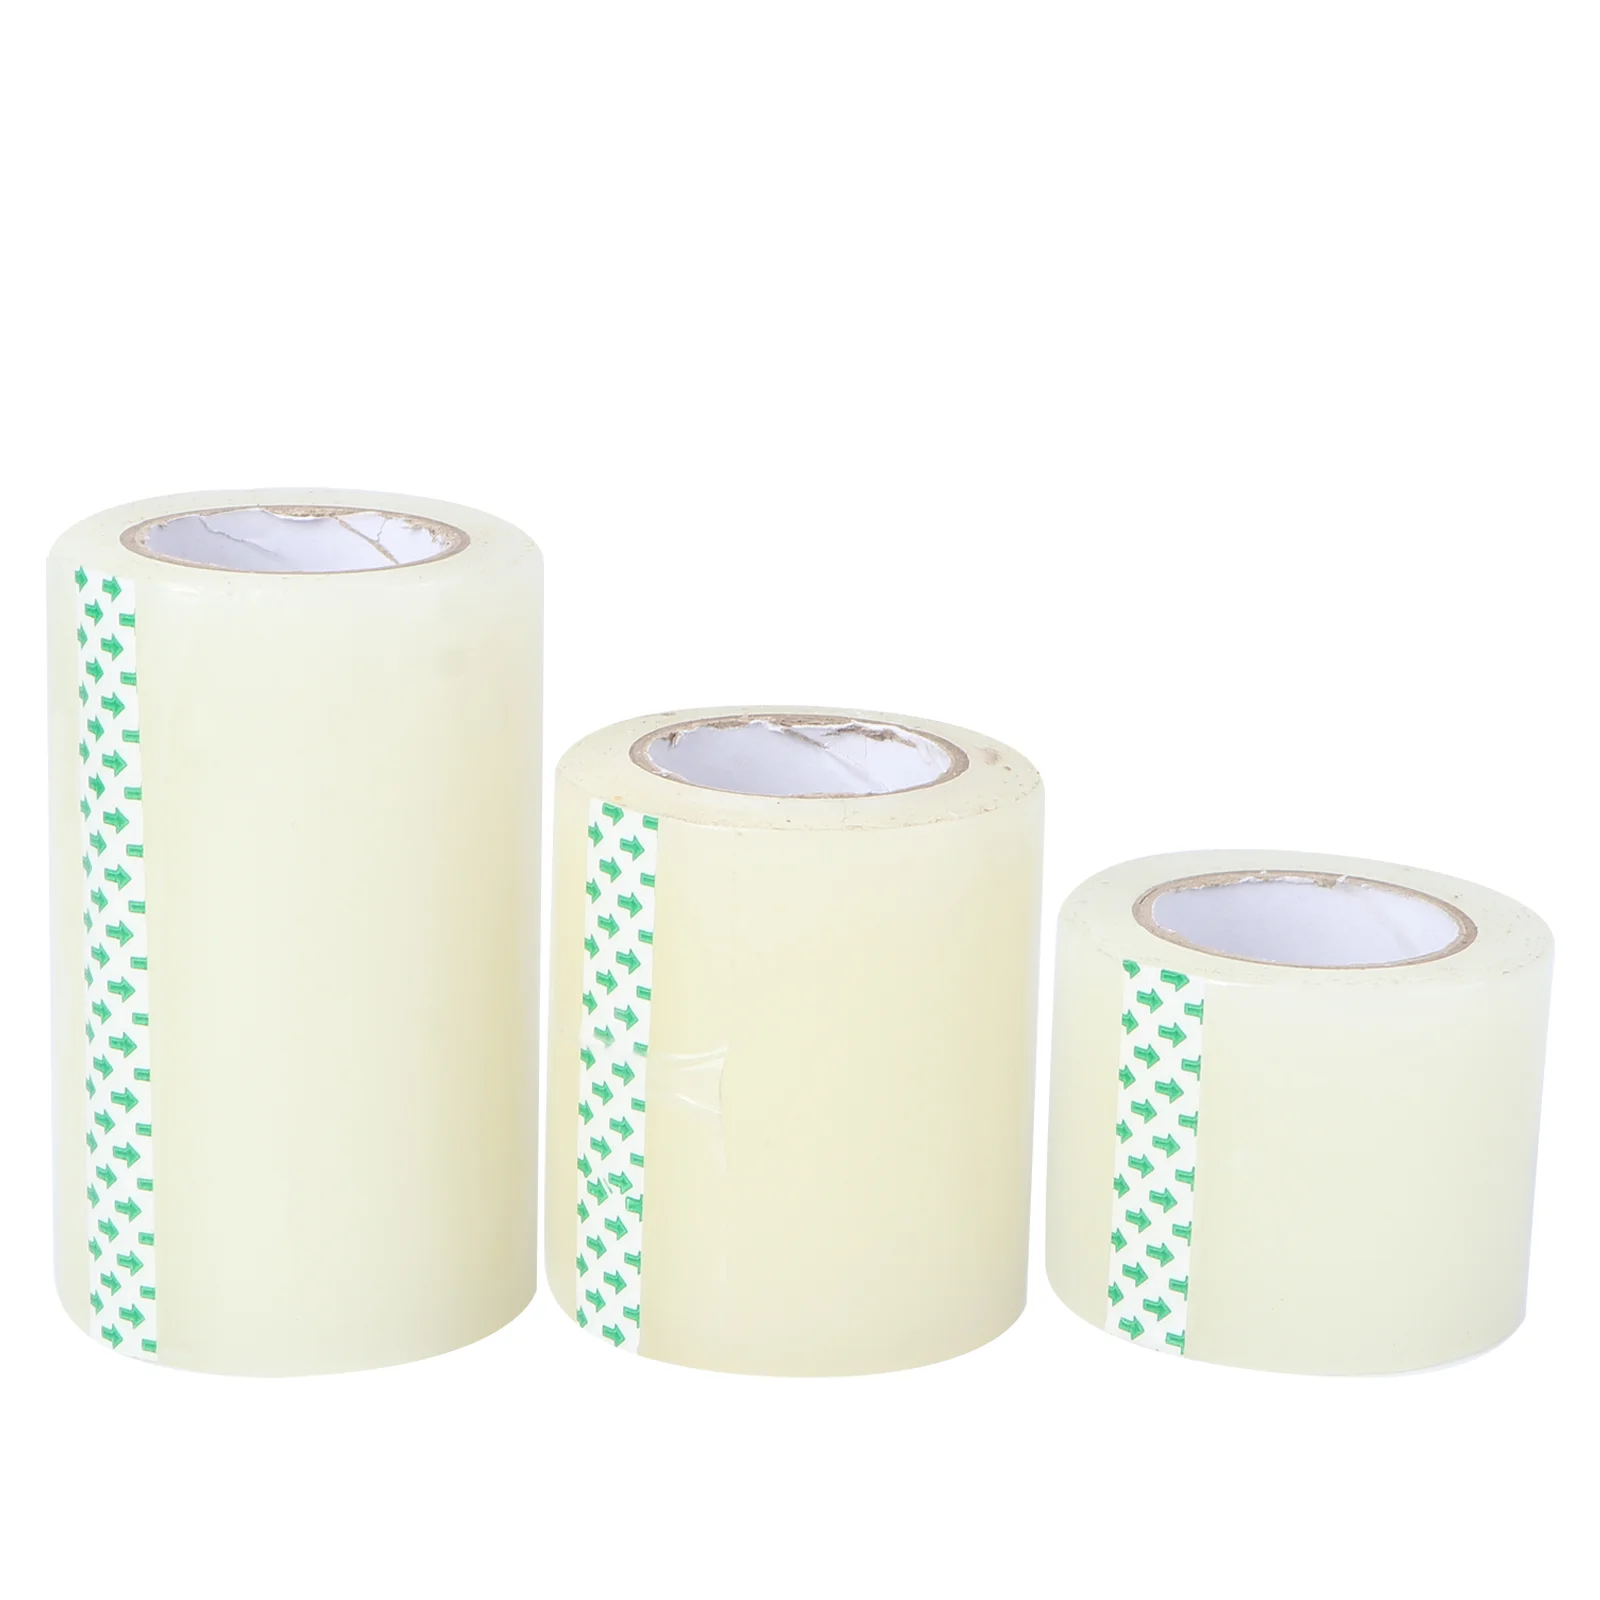 Greenhouse Tape 3 Rolls Greenhouse Film Repair Tape Poly Permanent Tape for Outdoor Revamp Gummed Supplies Size 1